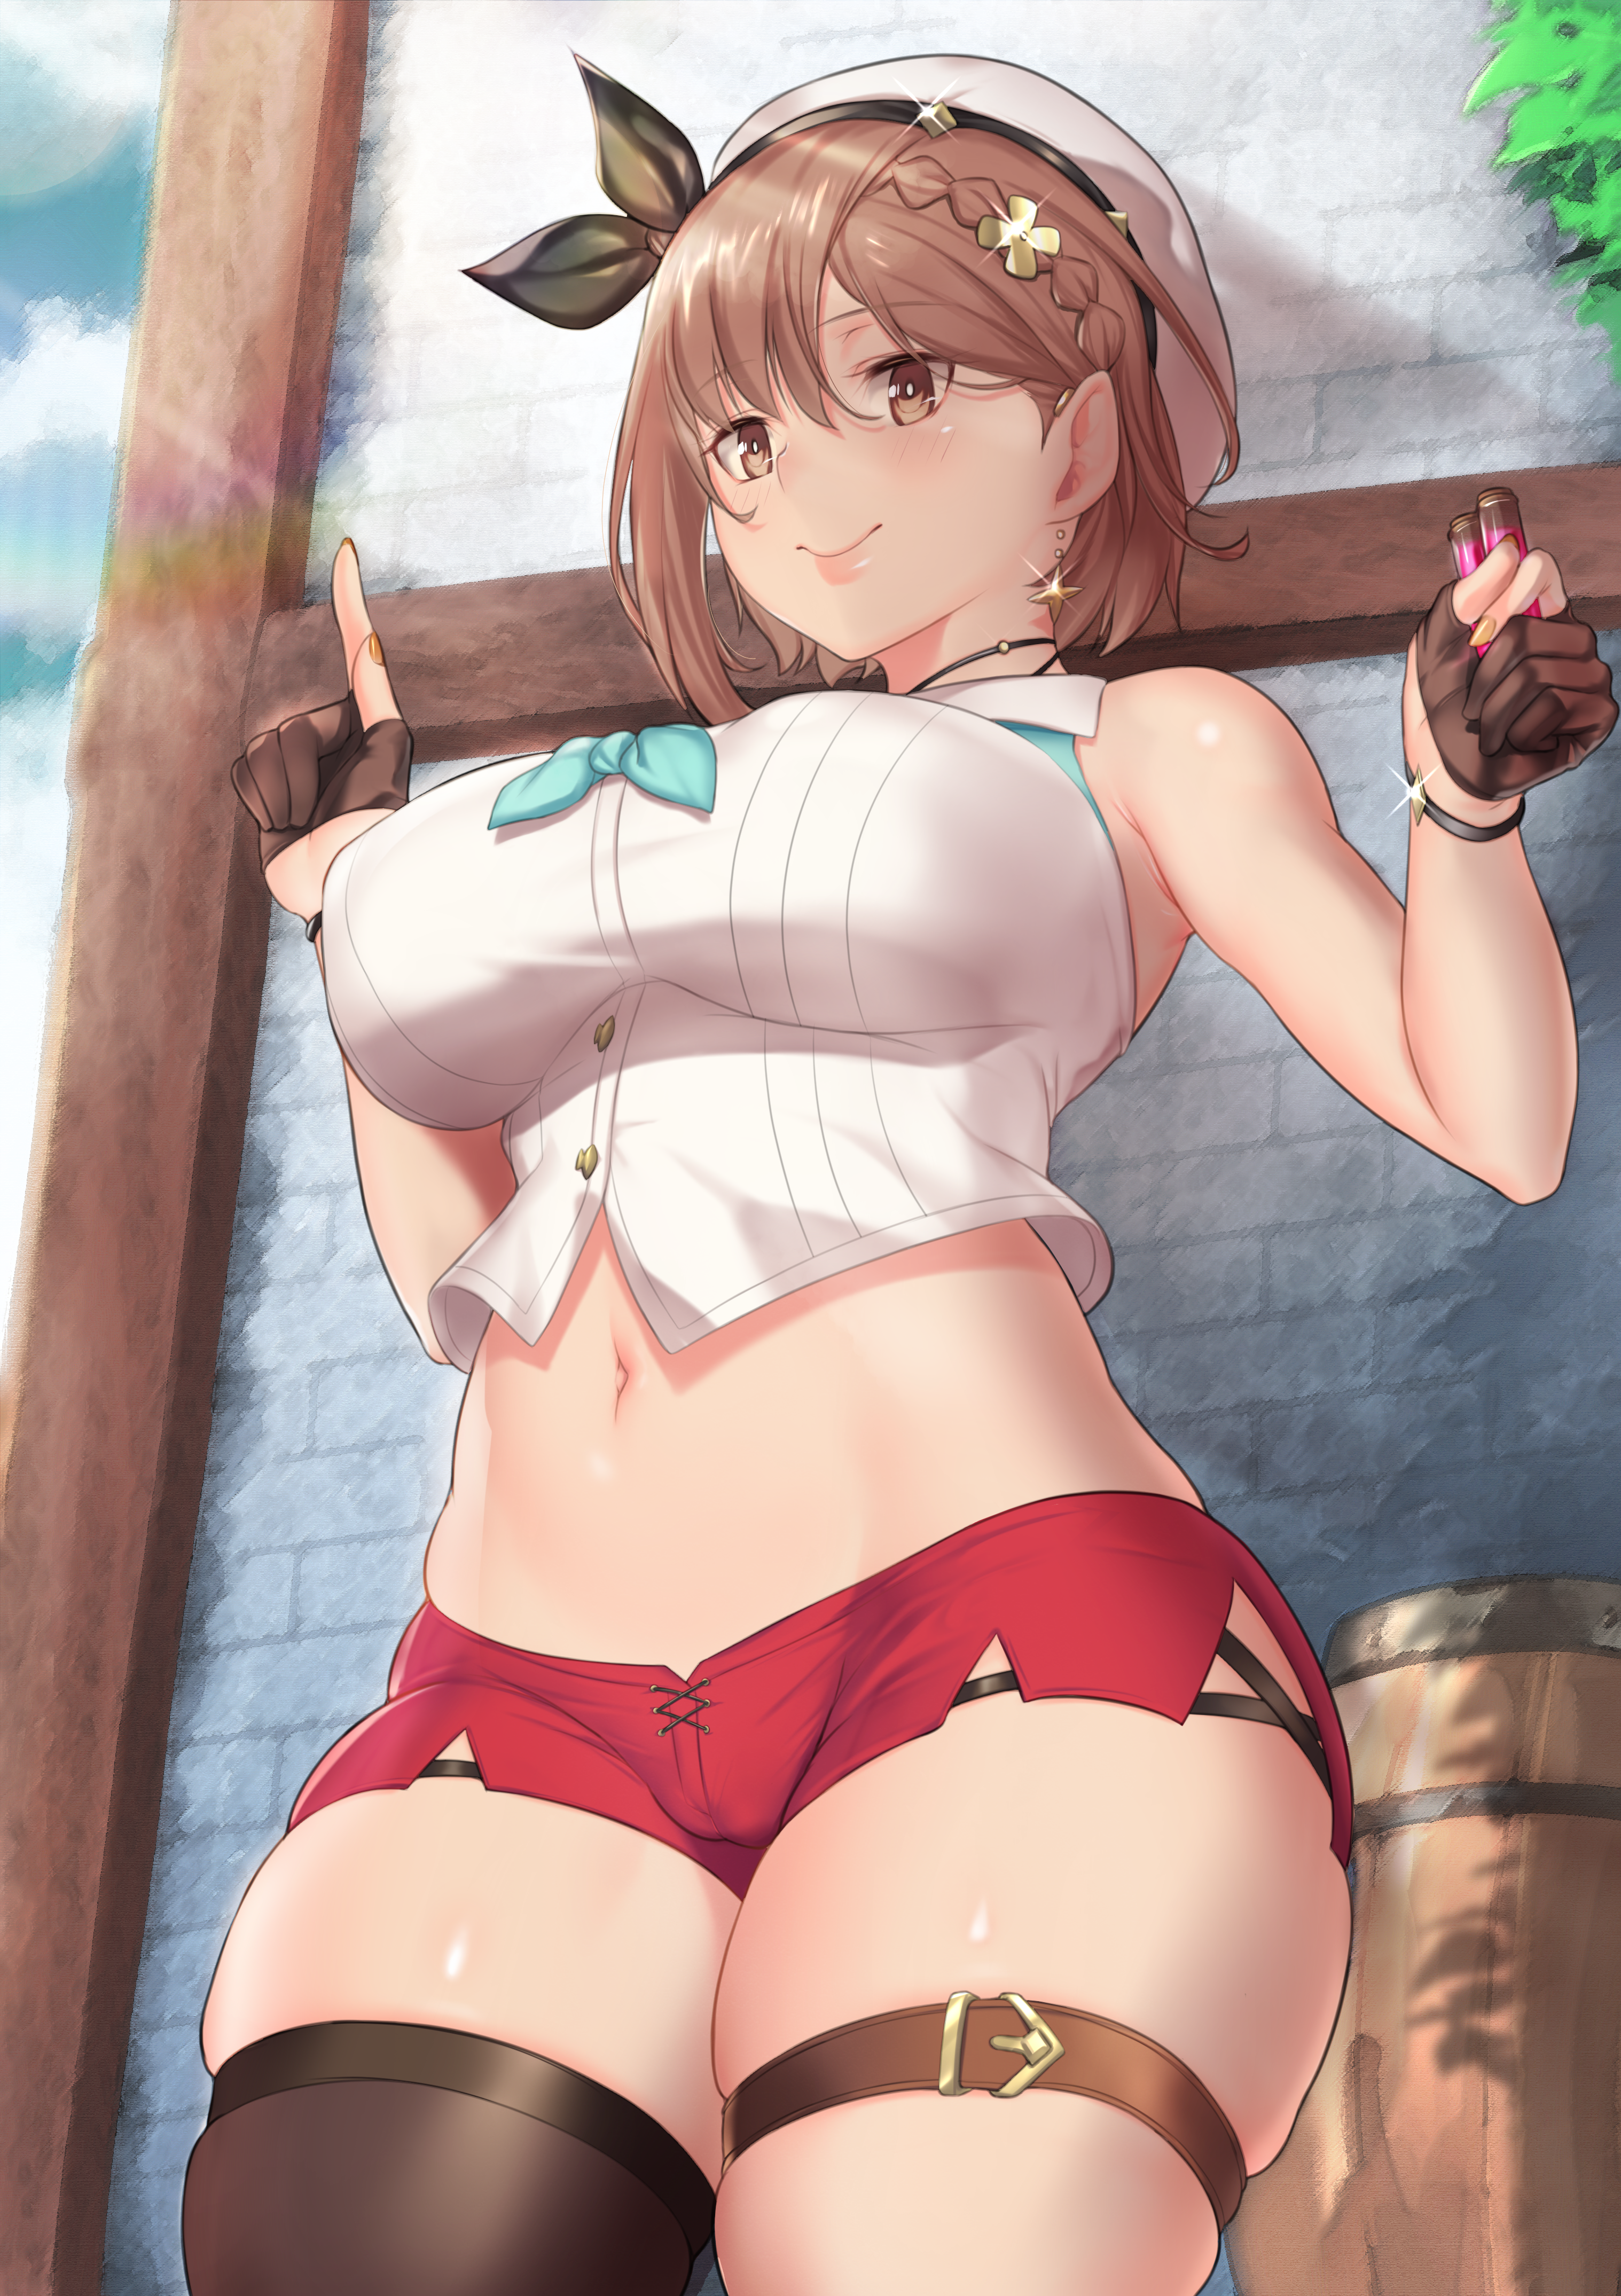 Anime 3035x4299 thick thigh thigh-highs Atelier Ryza Reisalin Stout short shorts big boobs brunette brown eyes anime girls Aster Crowley